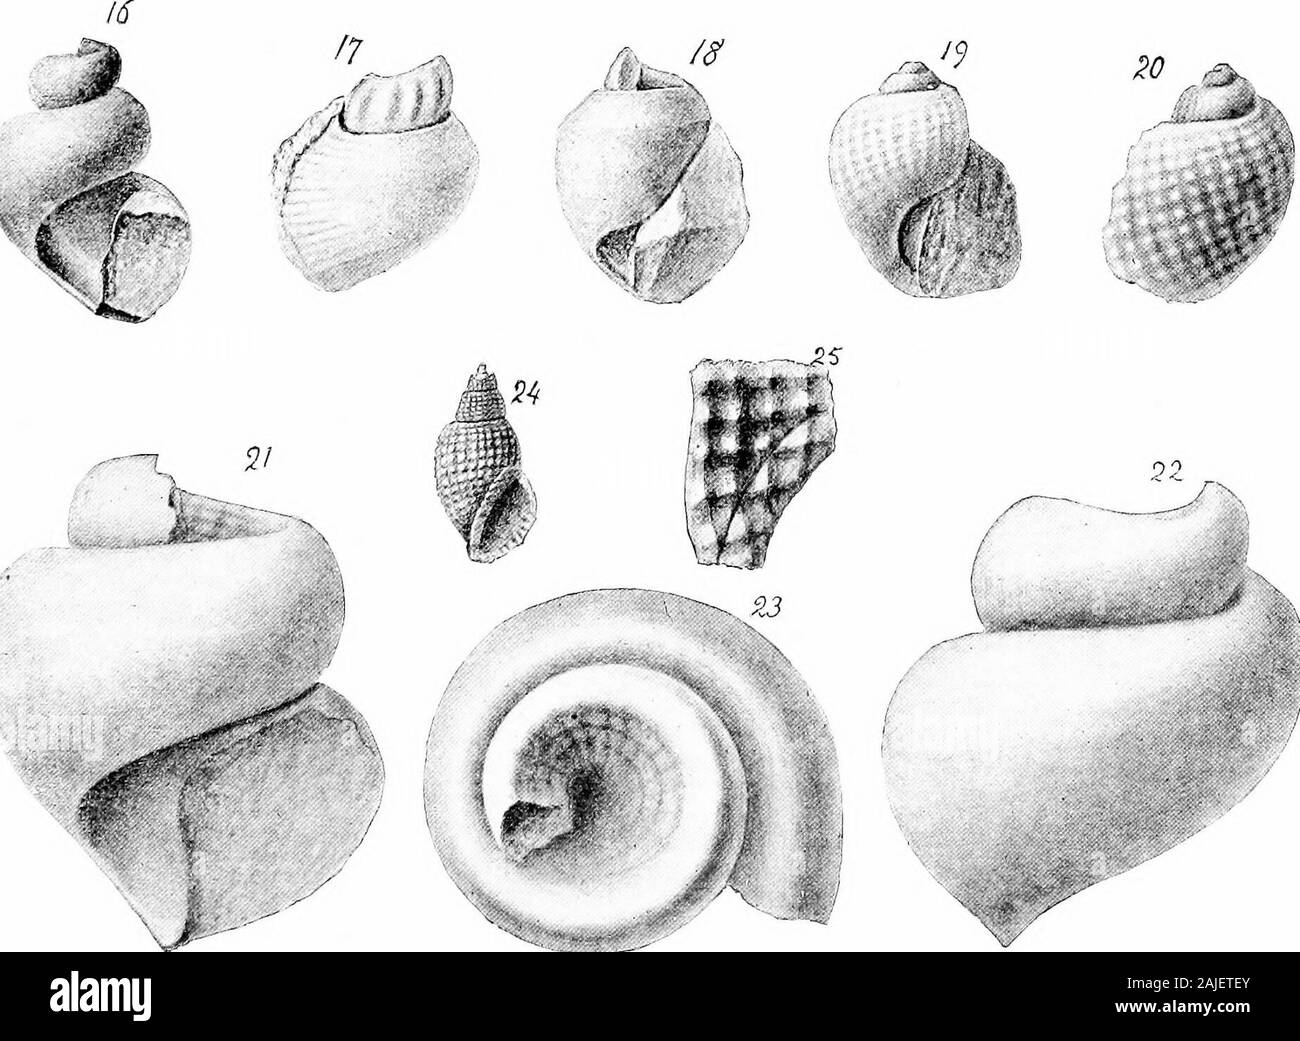 Report on paleontology . CANGELLARIID/E OF THE LOWER GREENSAND MARLS. PLATE XIII. EXPLANATION OP PLATE XIII. SliRCULA STRIGOSA Gabb (p. 105). Figs. 1. View of the fragment supposed to be the typo. CiTHARA MULLICAENSIS Whitf. (p. 106). 2,3. Front views, one natural size and one enlarged, of a specimen retaining the shell.4,5. Two views of a cast.6. View of a larger cast from the same locality. CiTHARA Crosswickensis Whitf. (p. 107). 7,8. Two views of the best cast yet found. ROSTEI.LARIA CURTA Whitf. (p. 109). 9,10. Views of the opposite sides of a oast showing the features described. 11. View Stock Photo